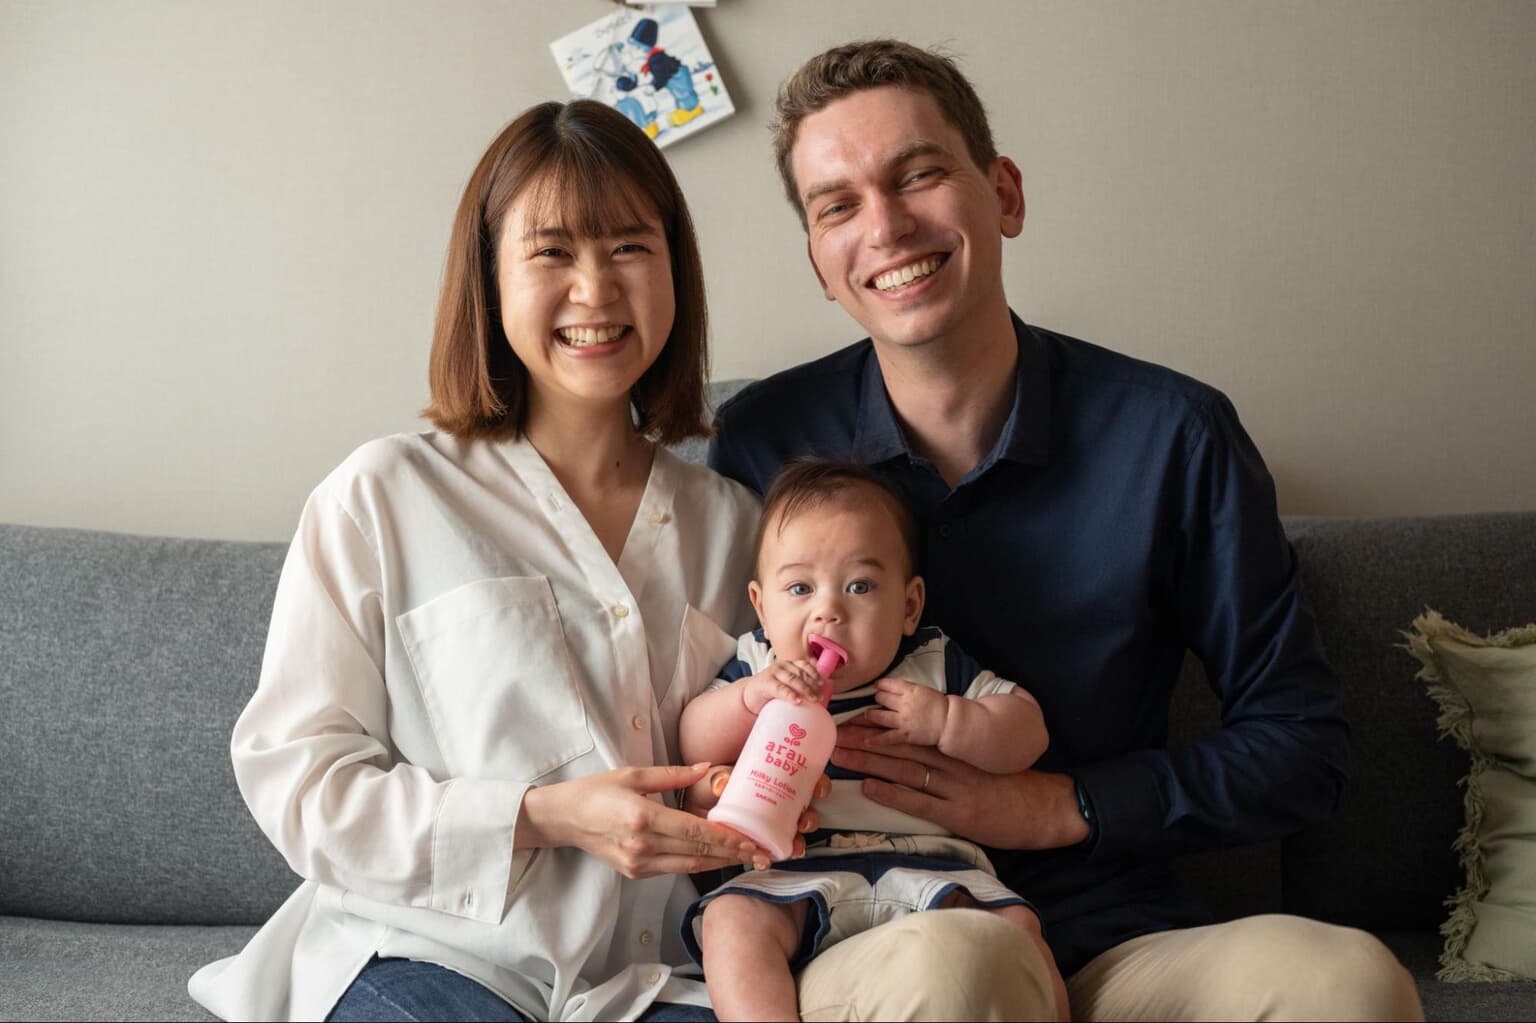 Tokyo Parenting: “I didn’t have any classes to learn how to wash the baby, hold the baby, feed the baby”